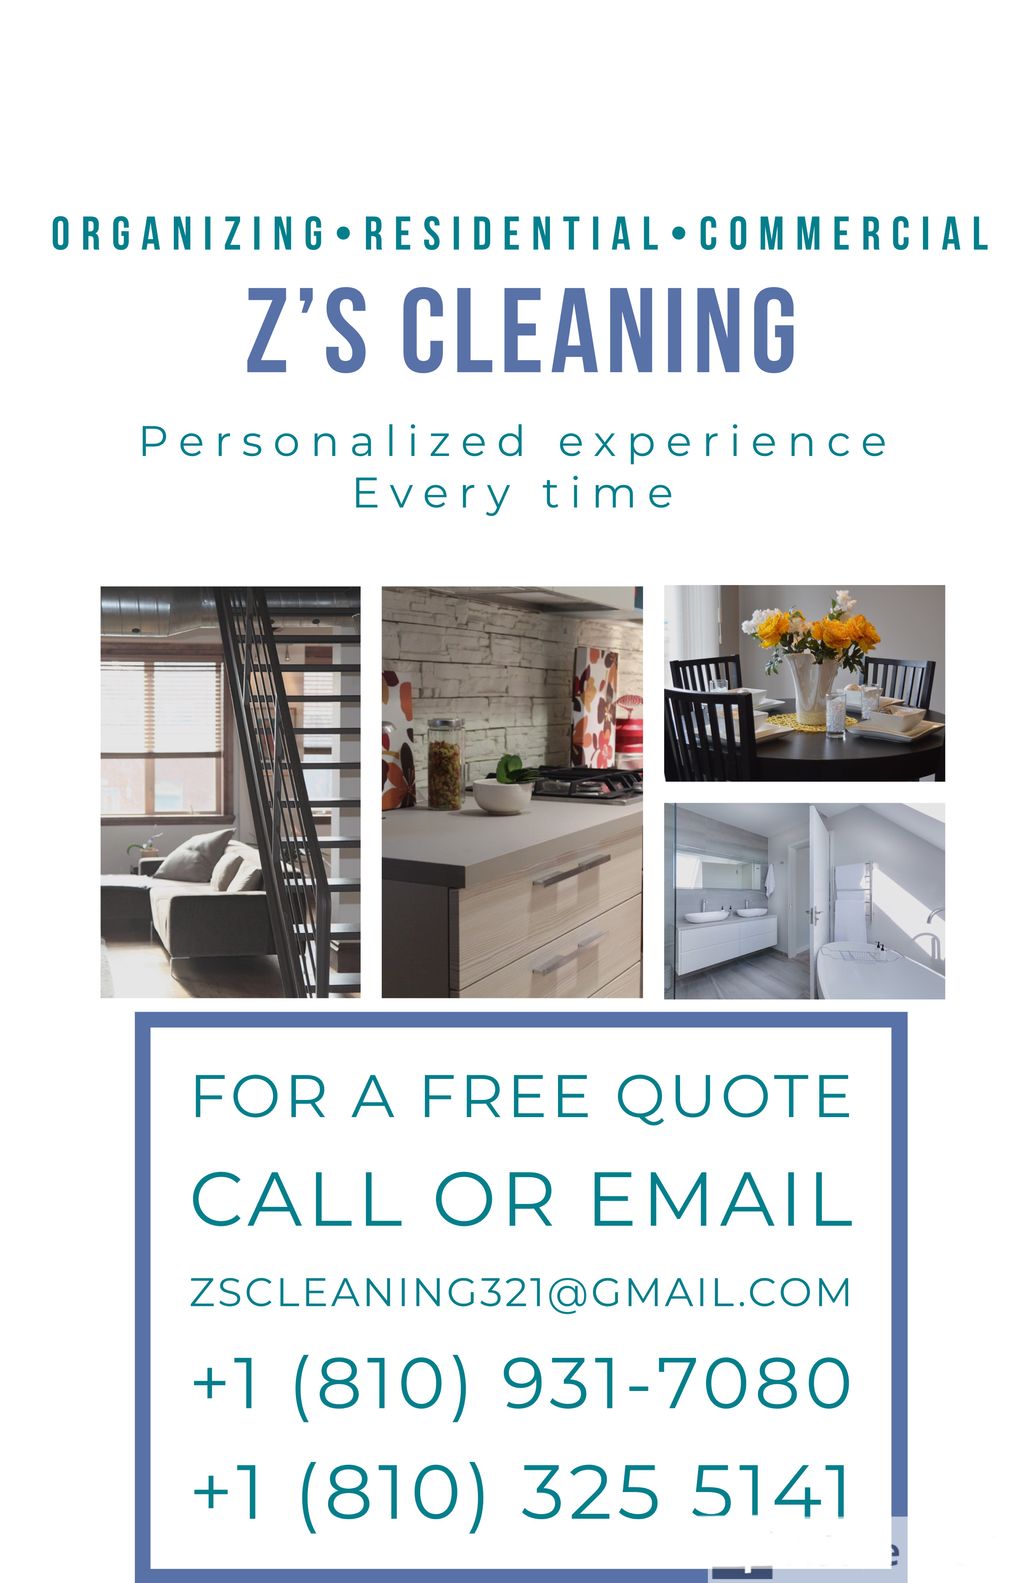 Z’s cleaning